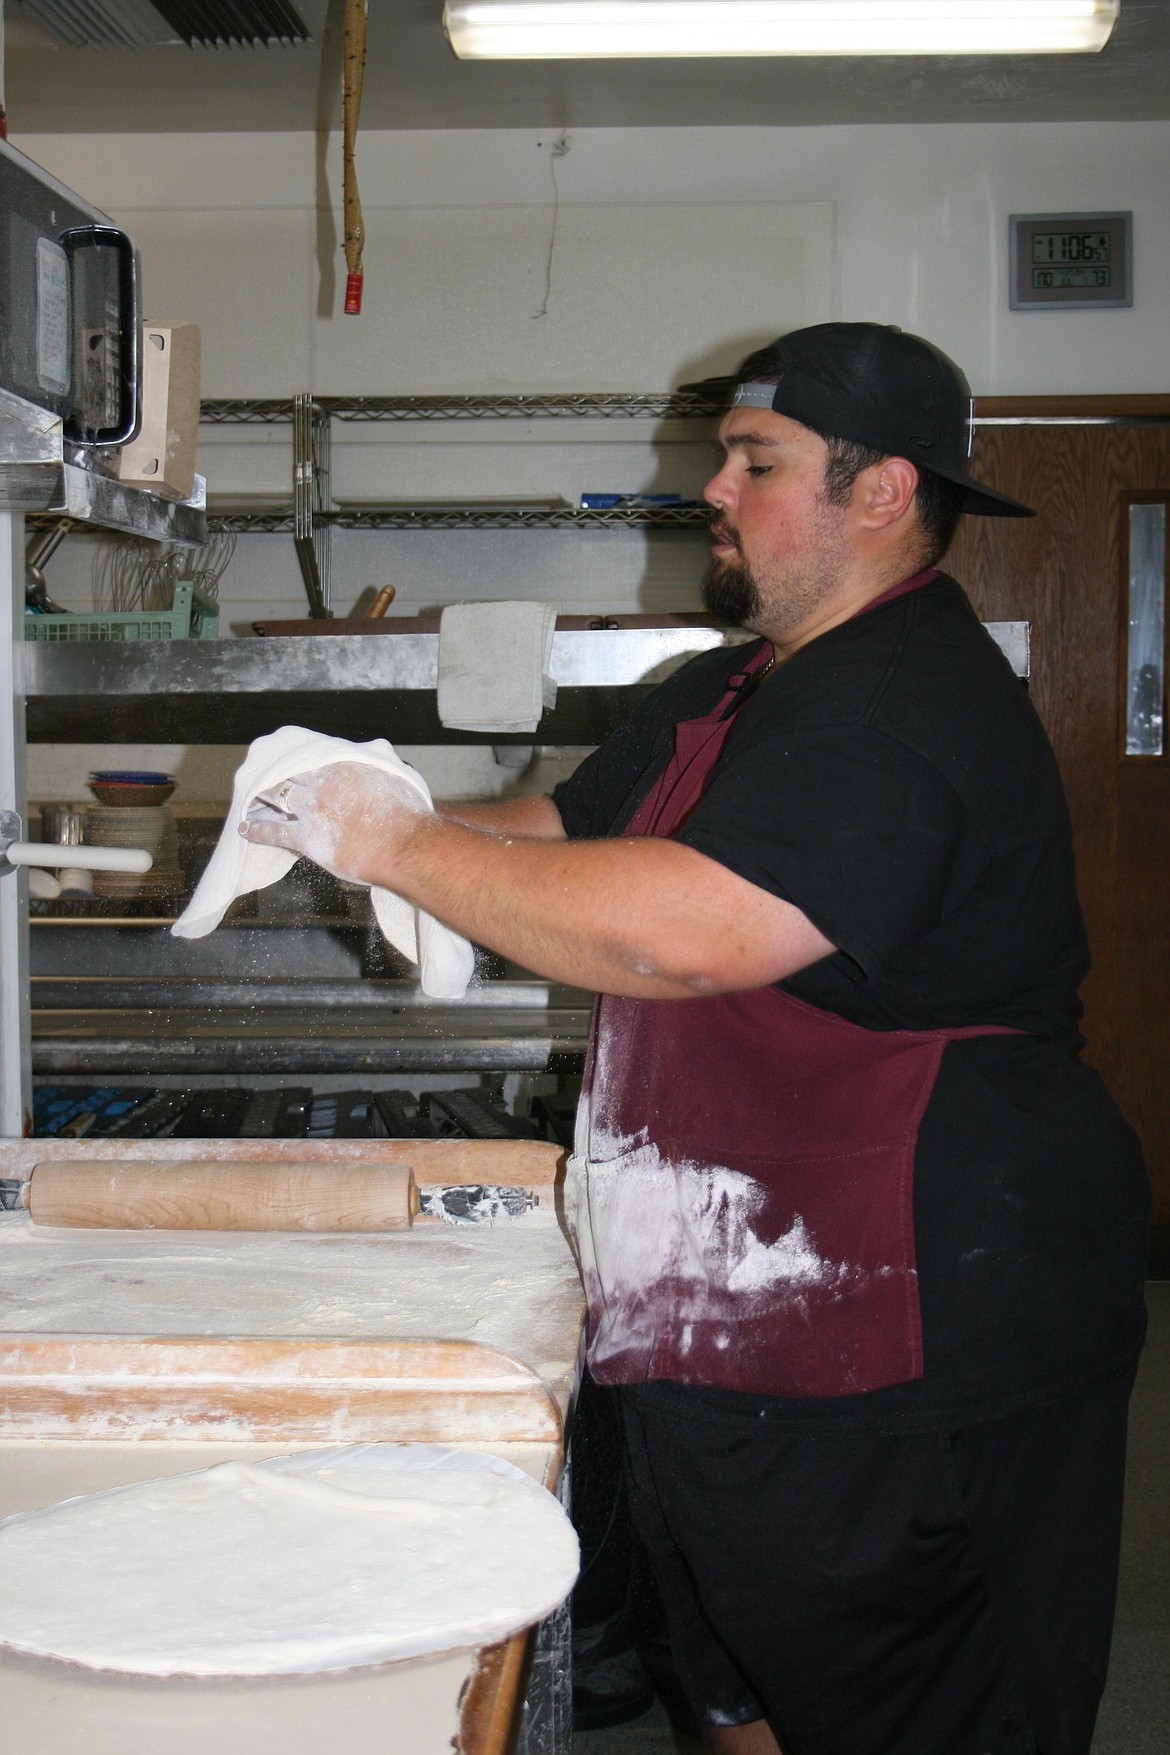 CJ Garza, co-owner of Timeout Pizza, gets pizza dough ready for the oven.